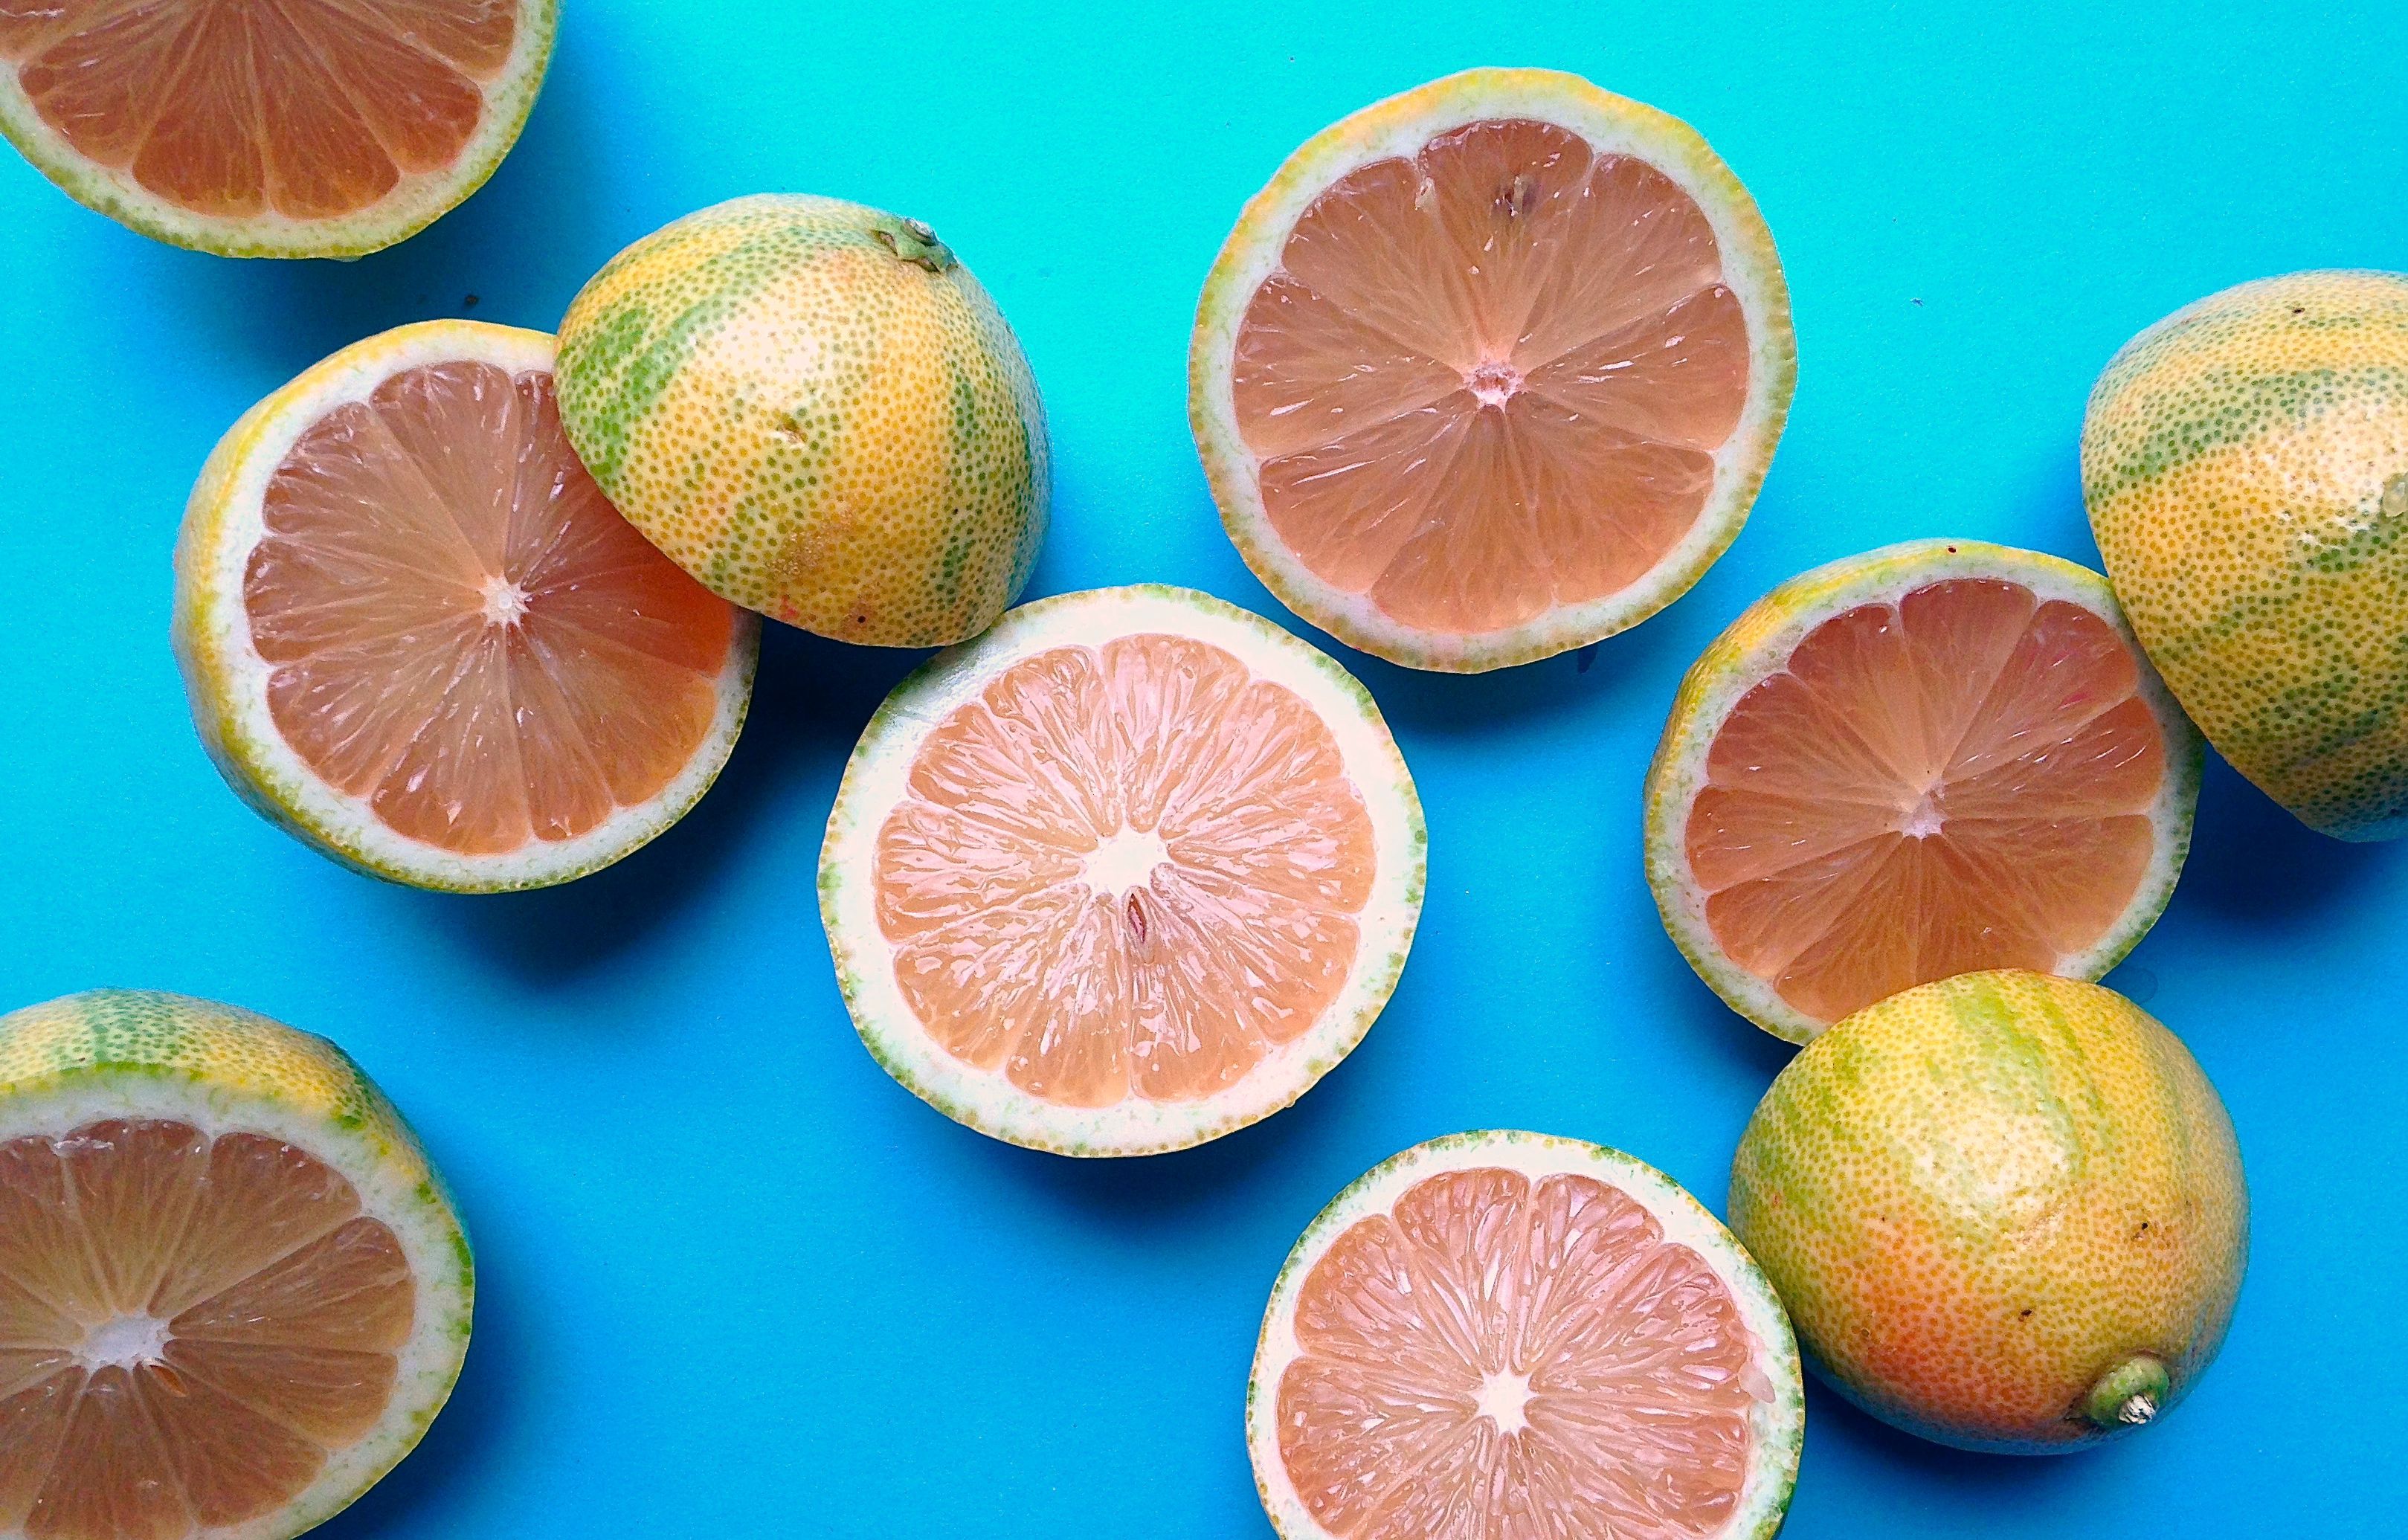 What Are Pink Lemons - Are Pink Lemons Real